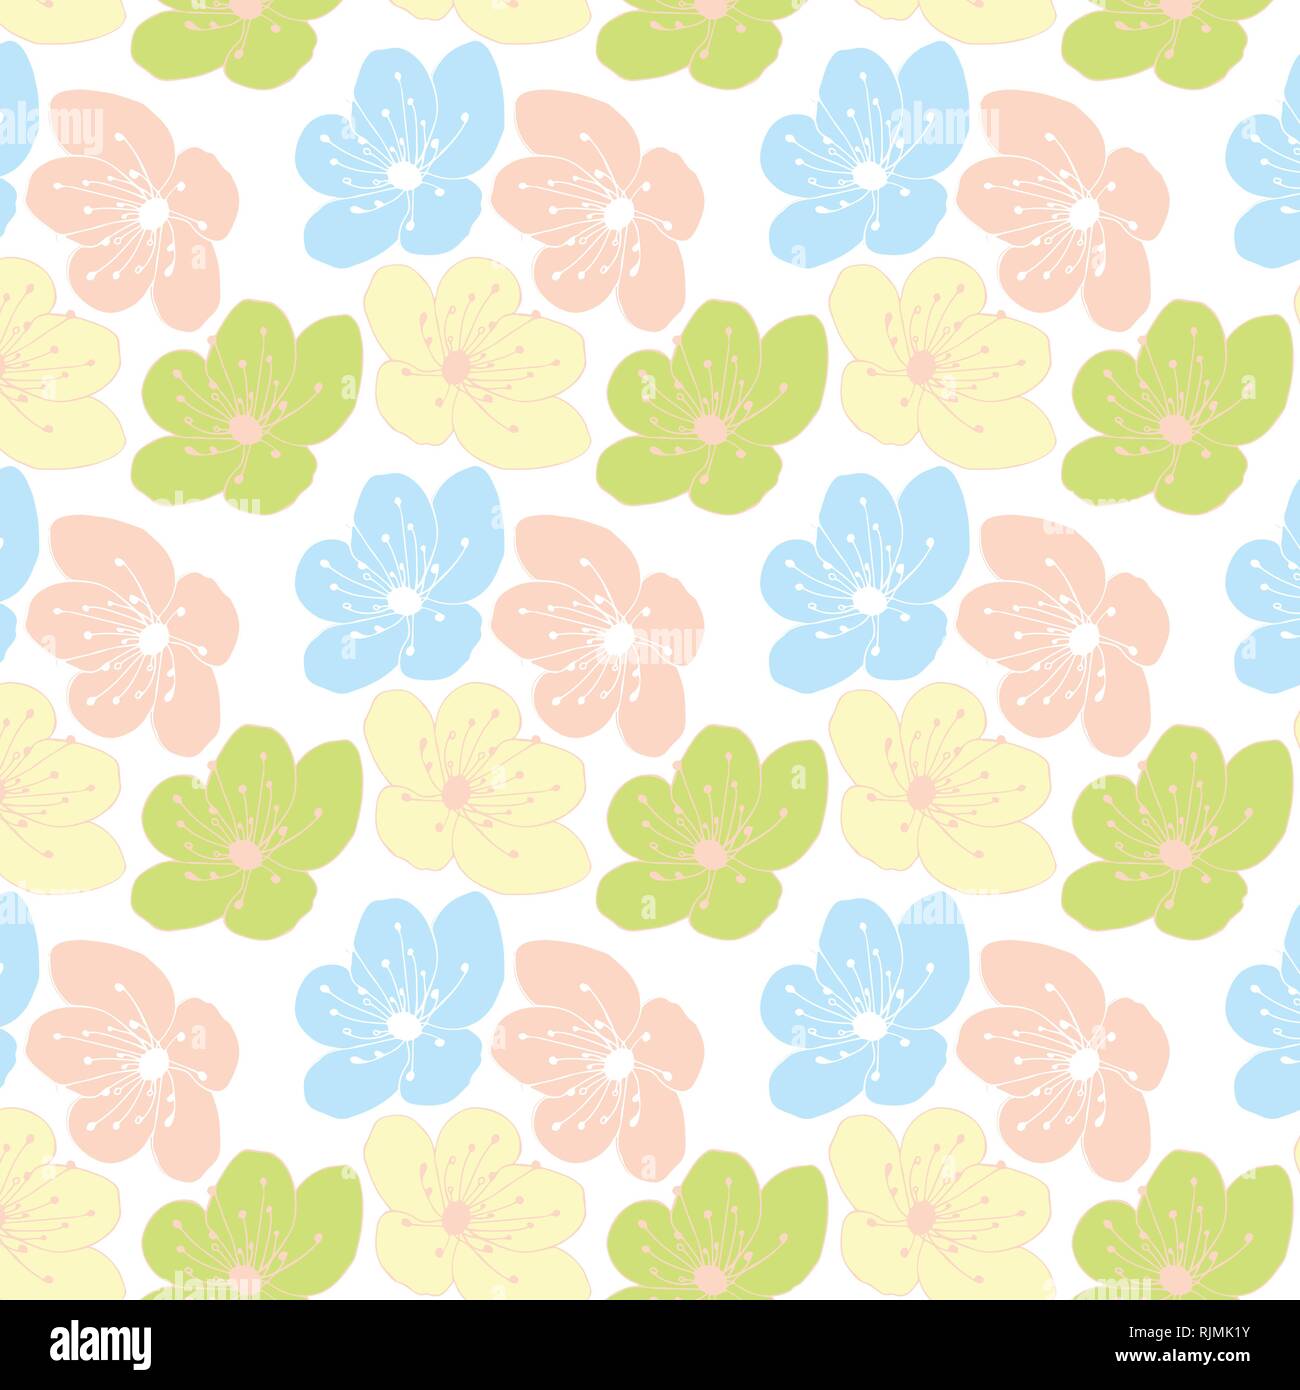 Cherry blossom flower vector pattern in a blue, yellow, pink and gray color palette Stock Vector